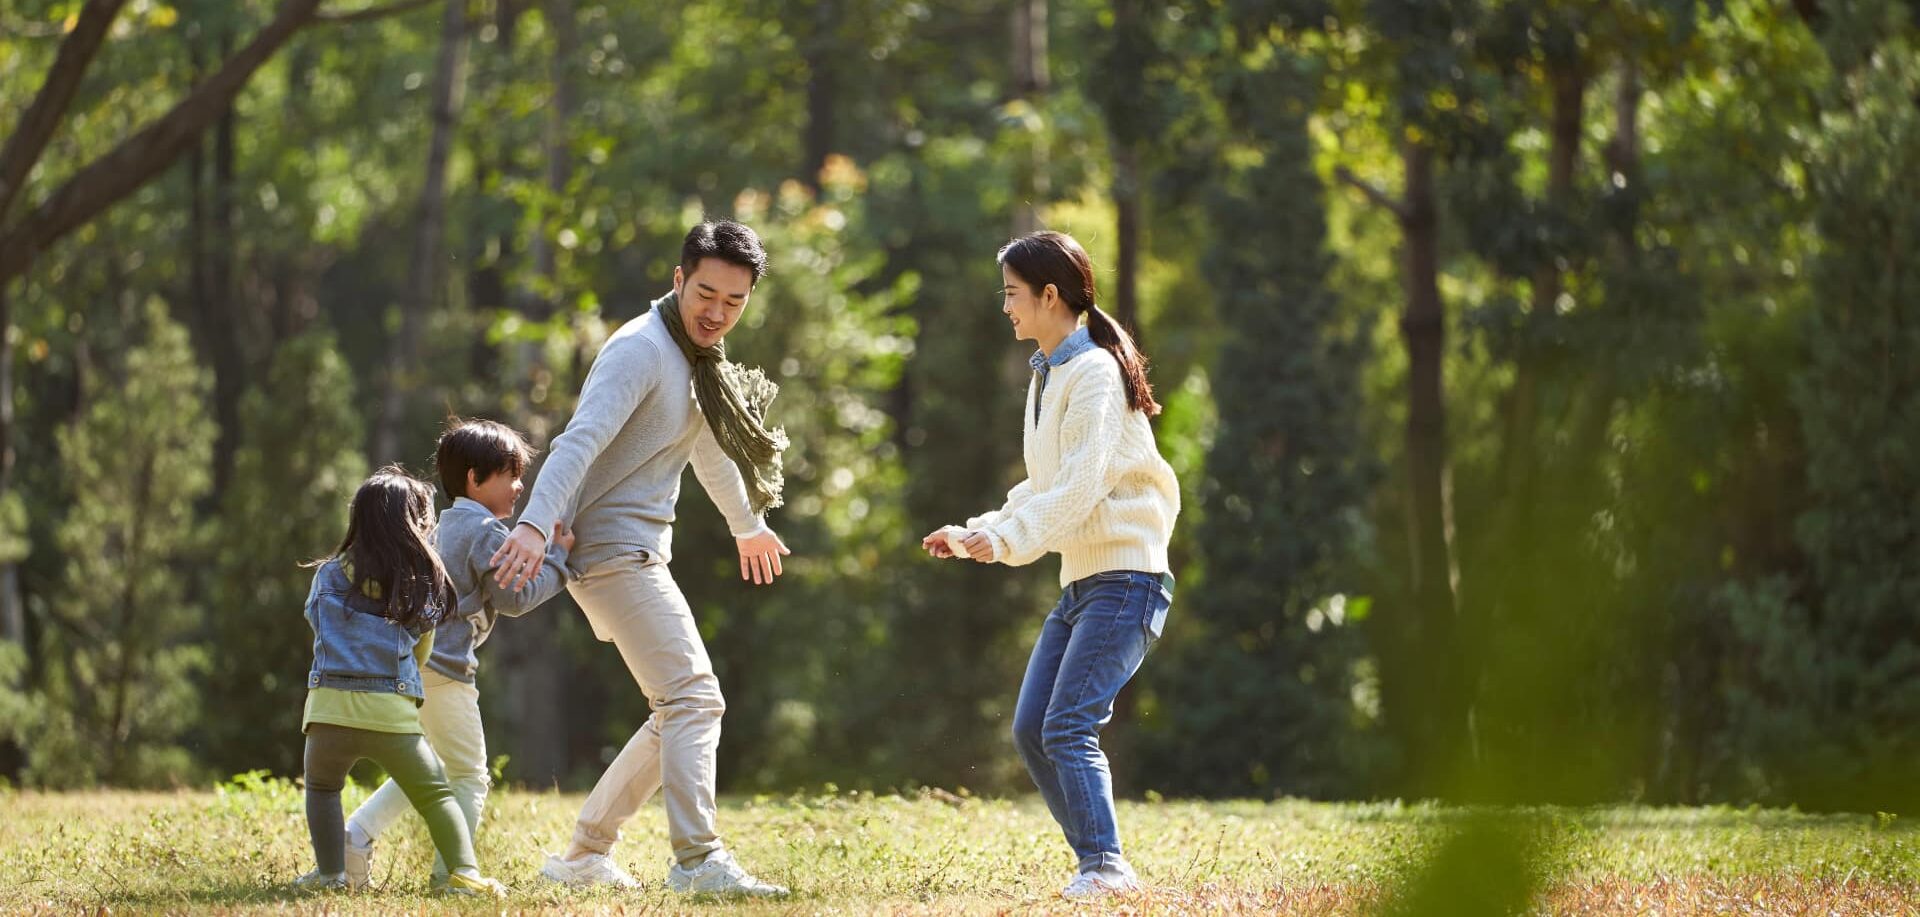 Asian parents demonstrating their authentic living principals playing with their kids in the park to support them in significant personal growth.